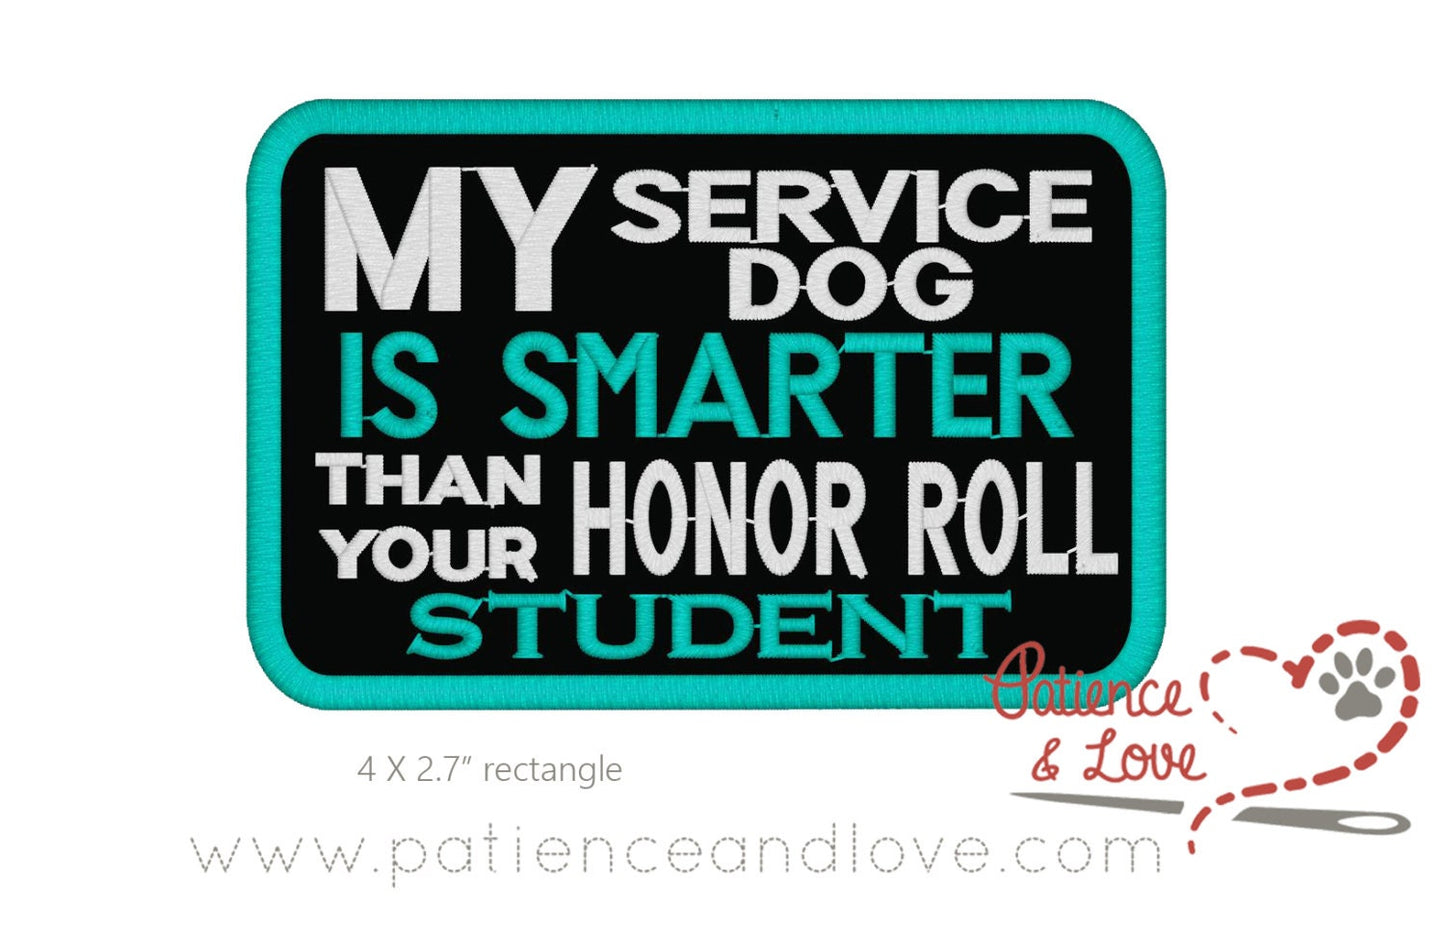 My service dog is smarter than your honor roll student, 4 x 2.7 inch rectangular patch